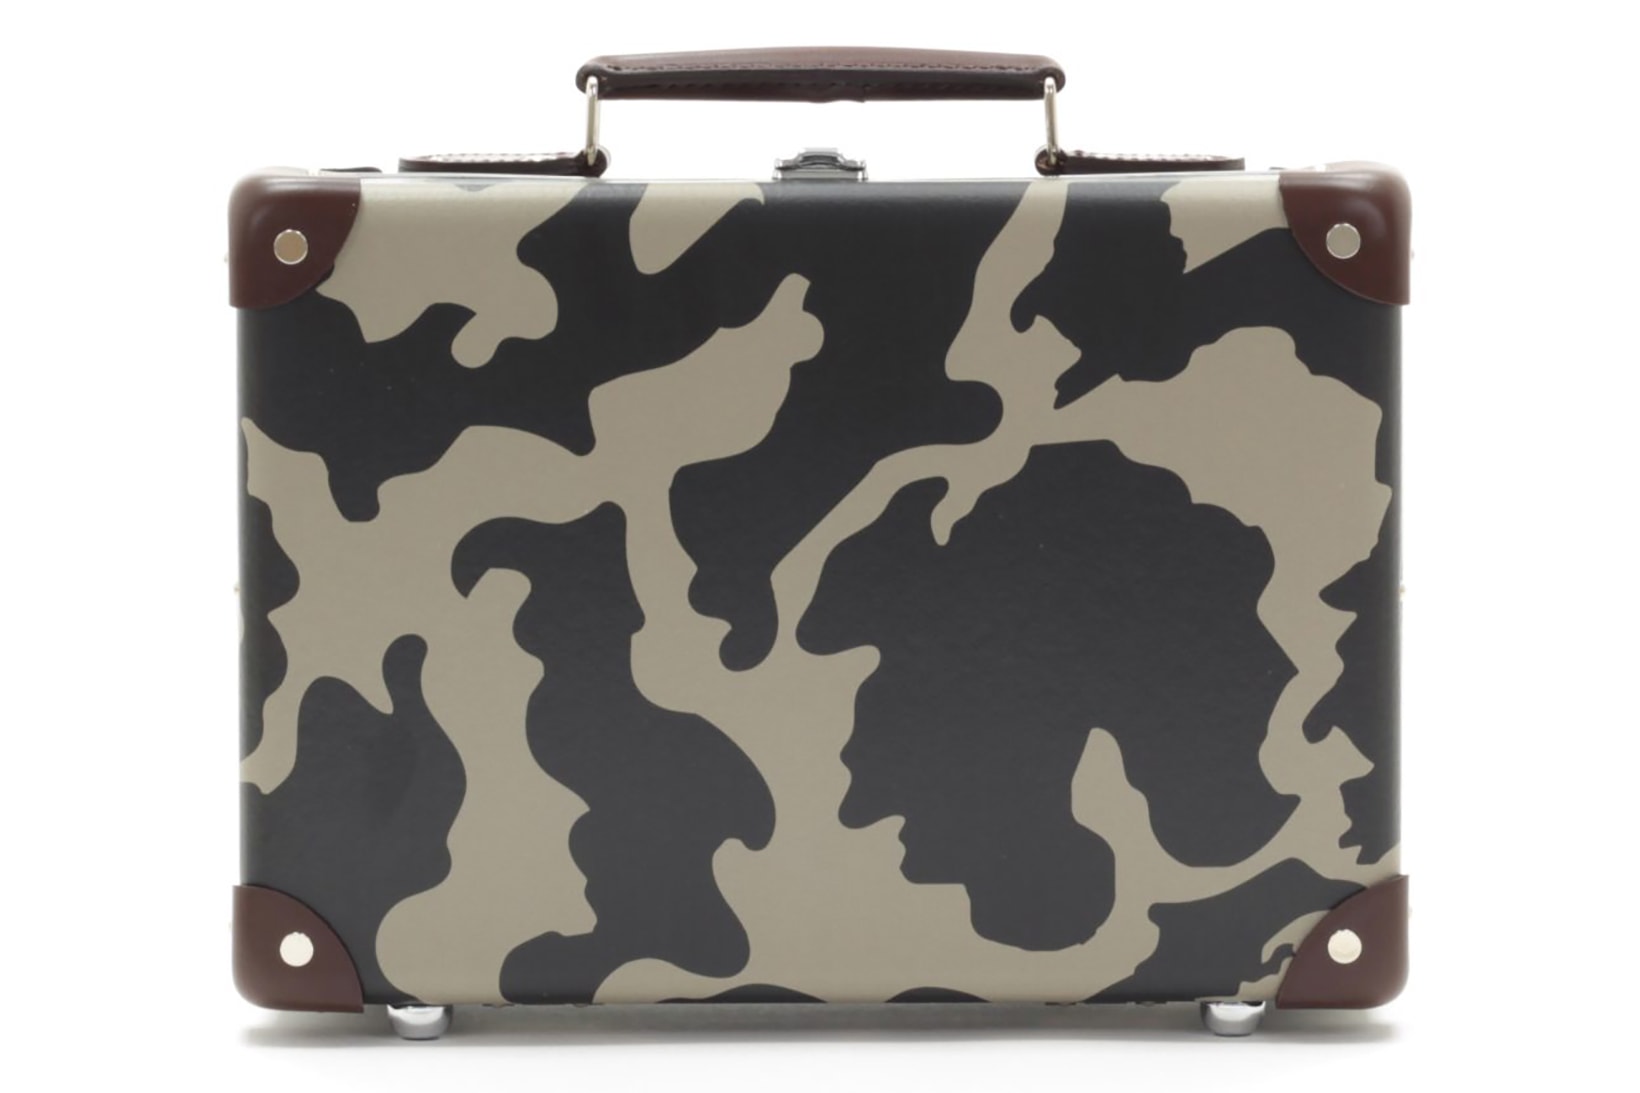 Globe-Trotter Camouflage Print Luggage Imagery for Spitfire's 80th Anniversary